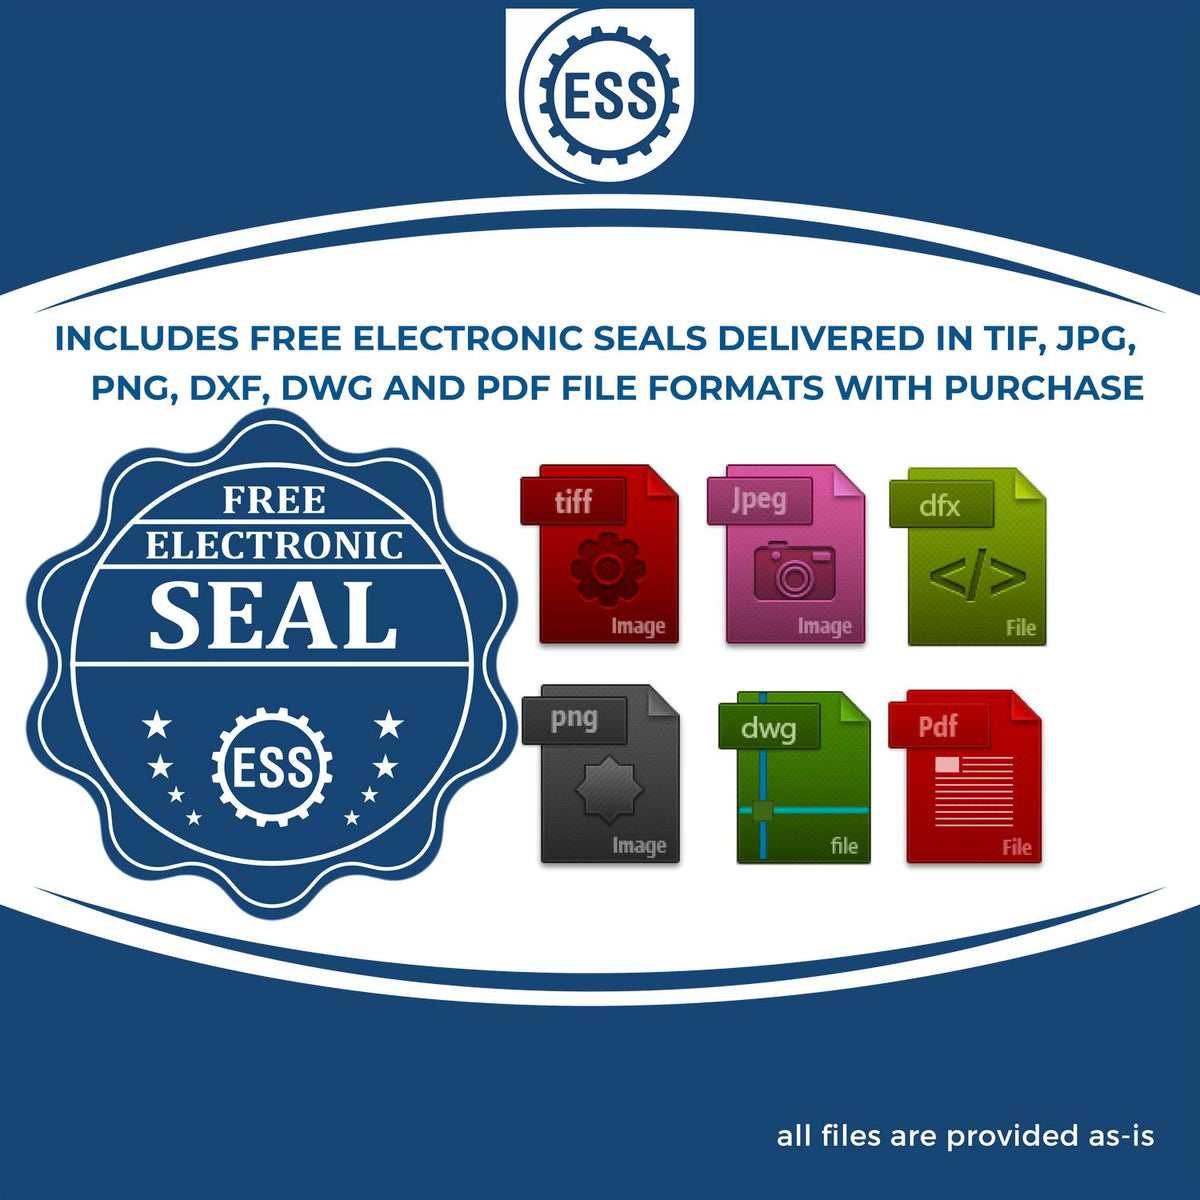 An infographic for the free electronic seal for the Minnesota Desk Architect Embossing Seal illustrating the different file type icons such as DXF, DWG, TIF, JPG and PNG.